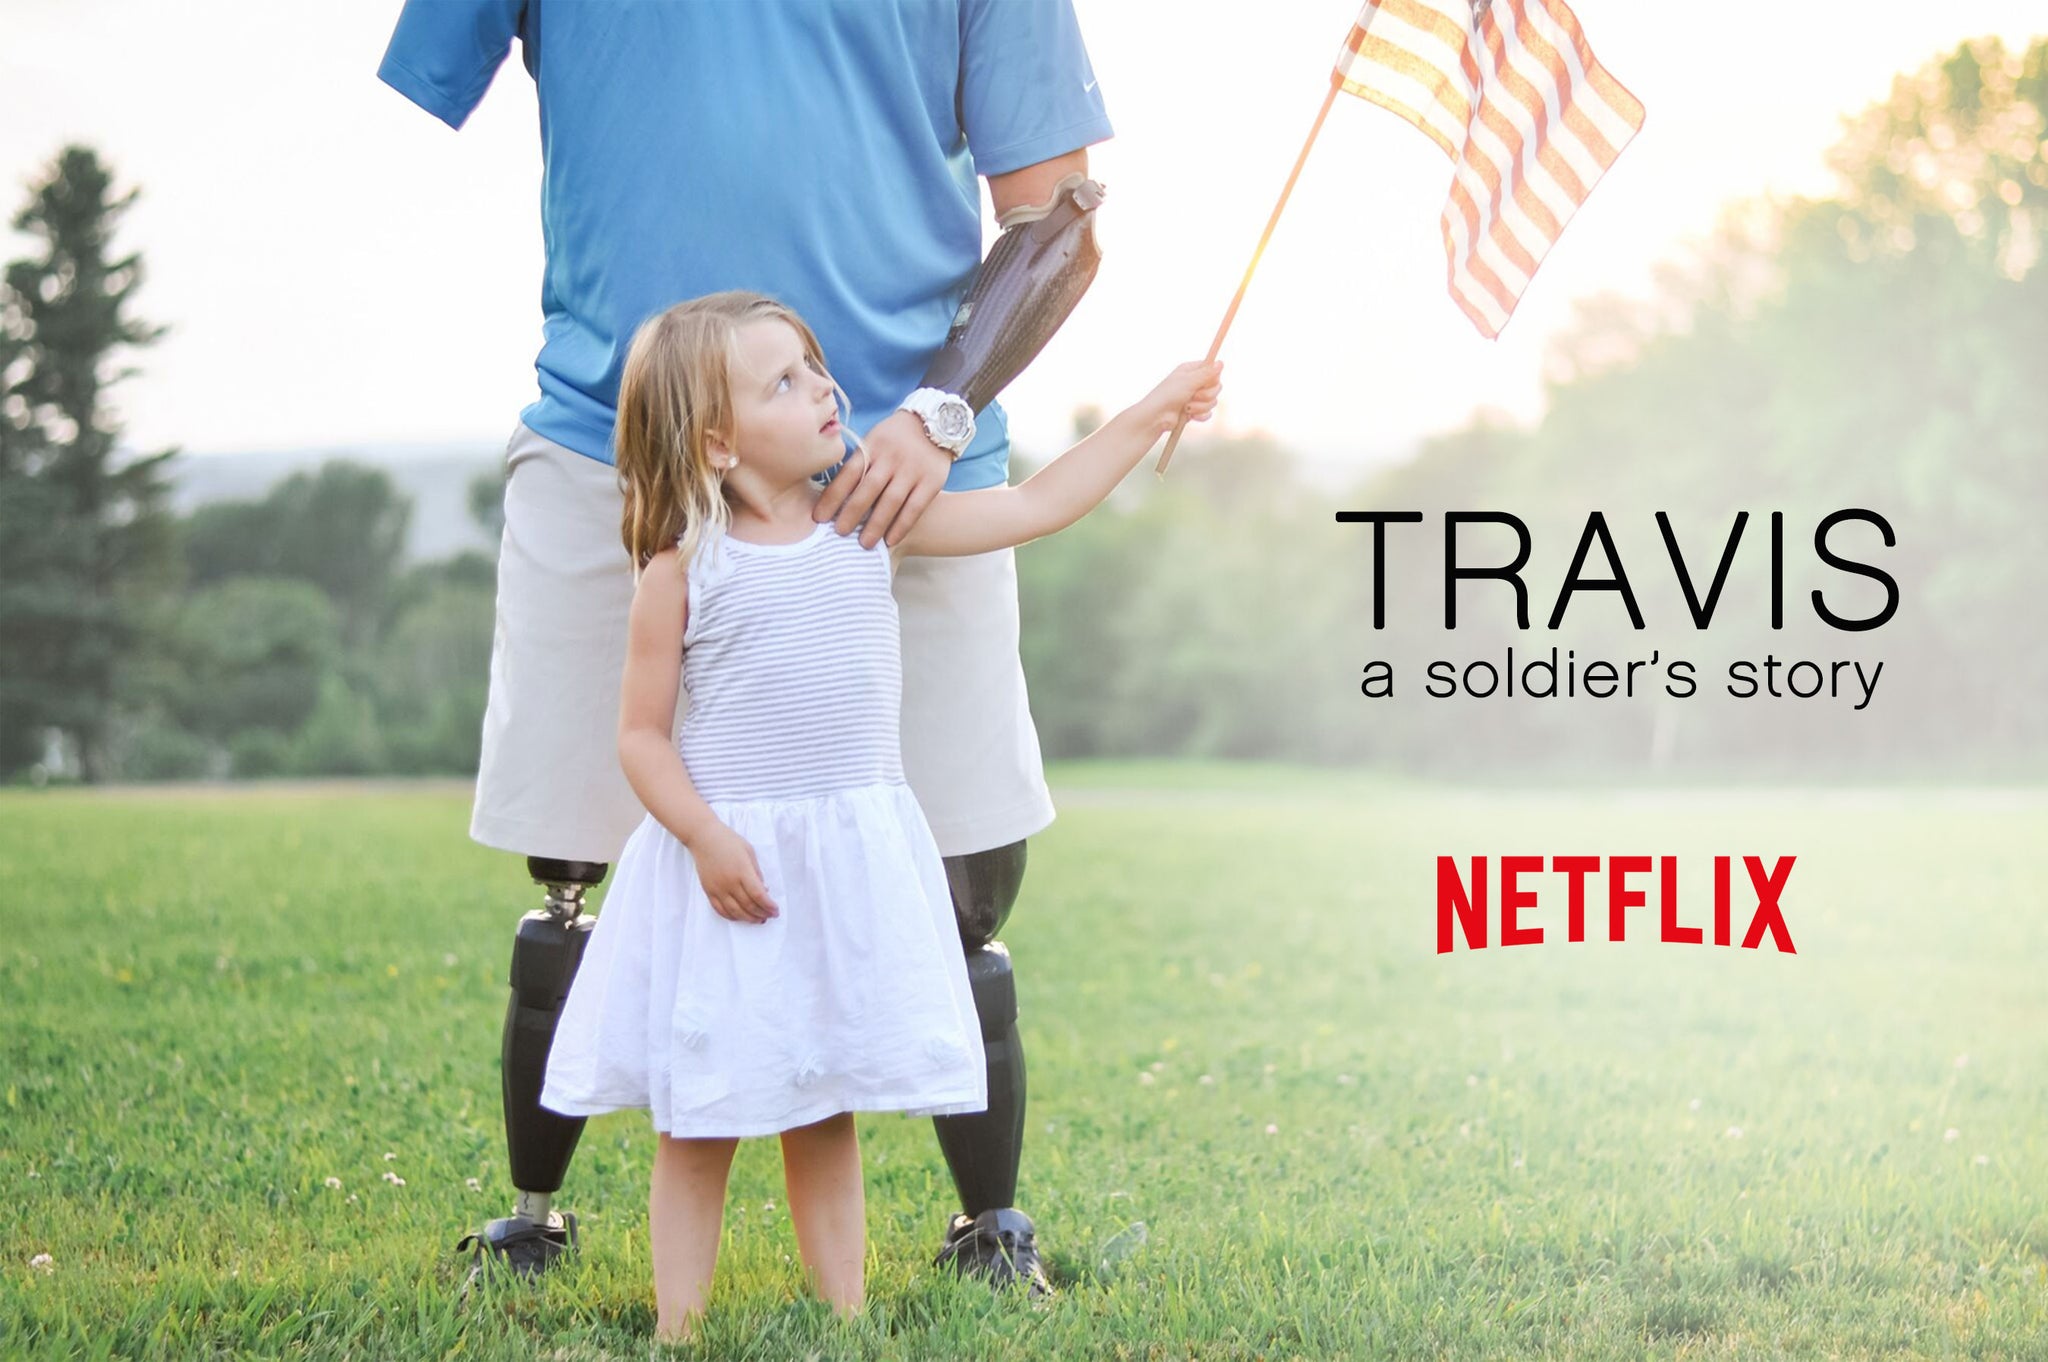 Travis: A Soldier's Story on Netflix